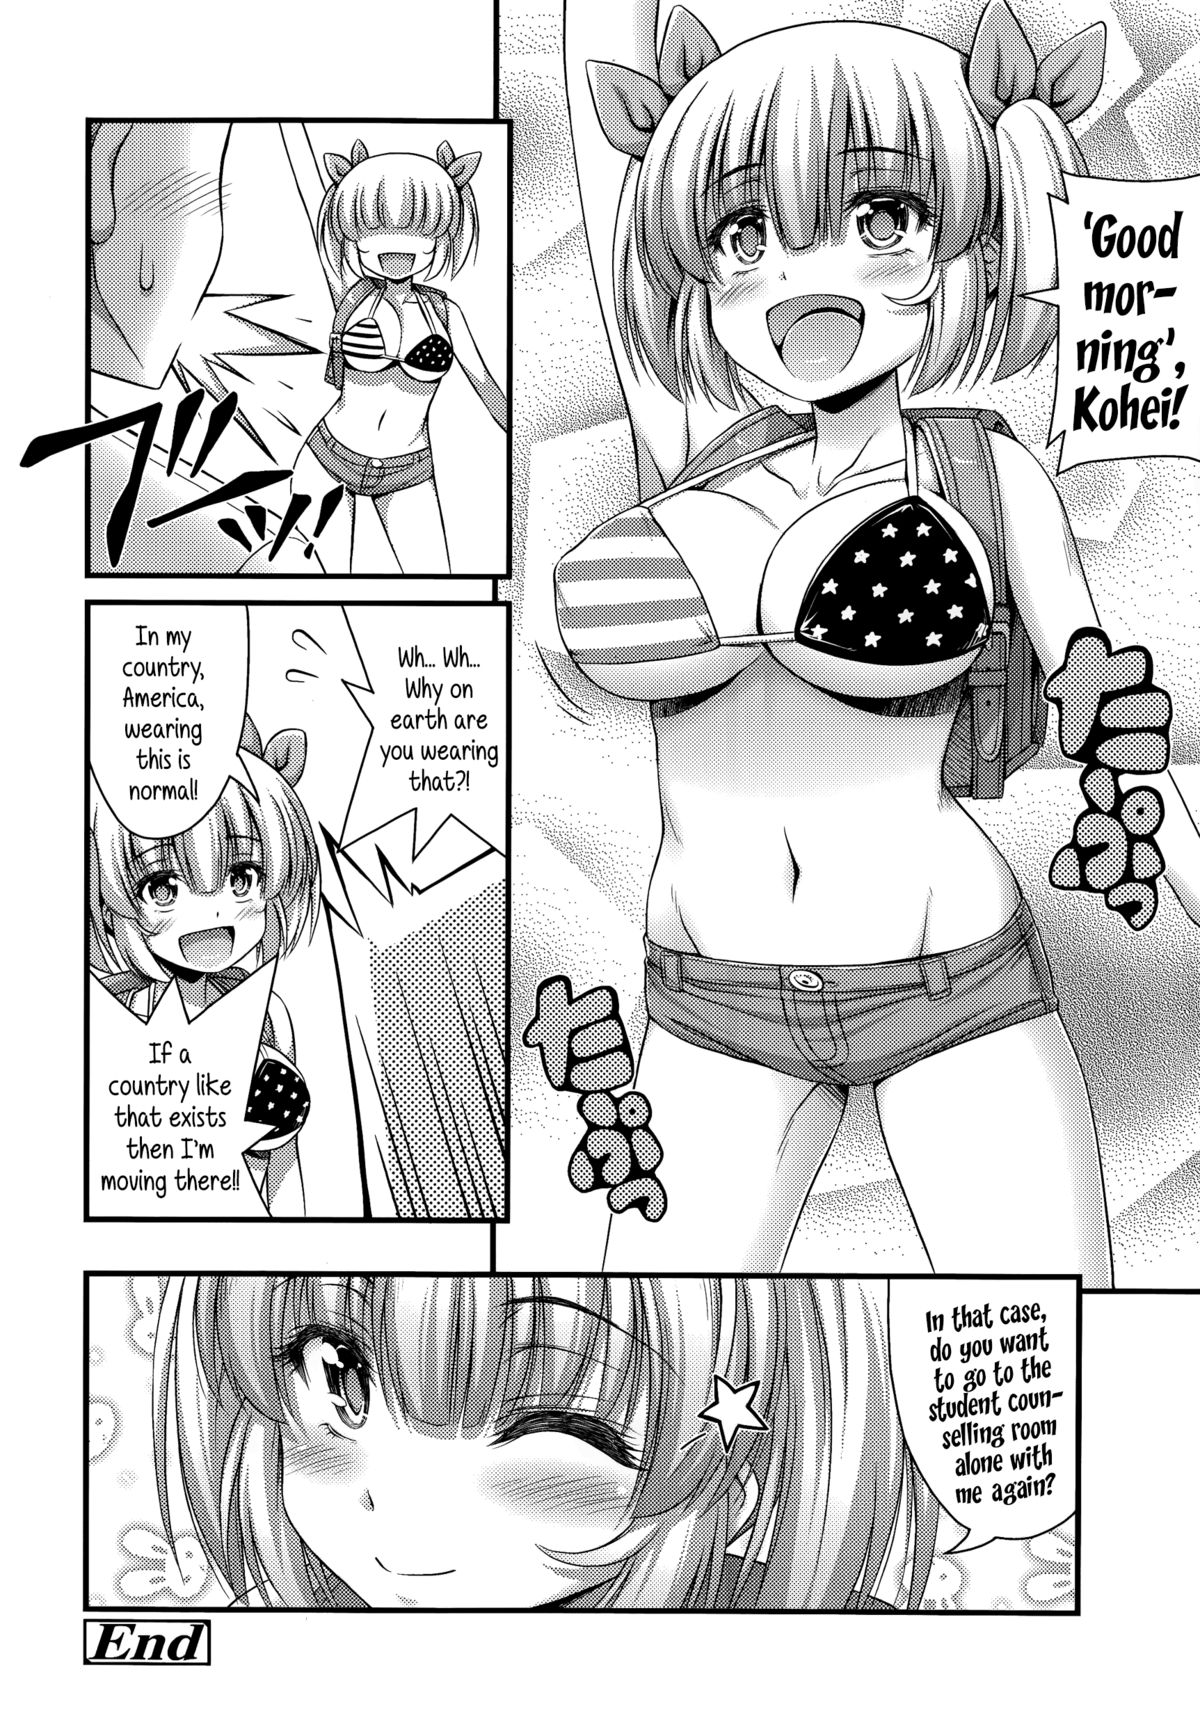 [Noise] American Style Ch. 1-2 [English] {5 a.m.} page 16 full